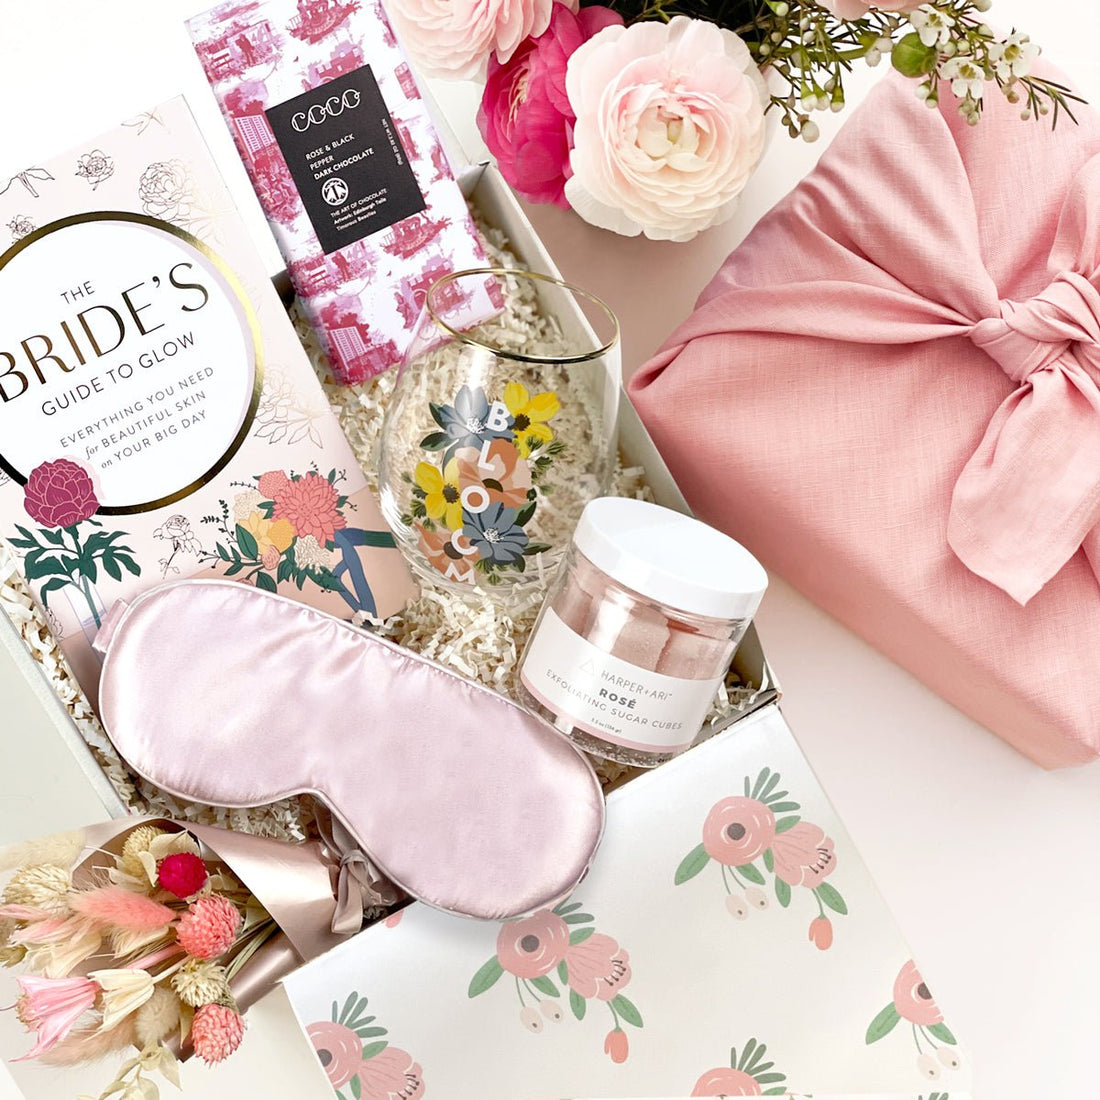 Bride to Be curated gift box, perfect for wedding party and bridal gift. Contain Bride's guide to glow, coco rose chocolate and more.